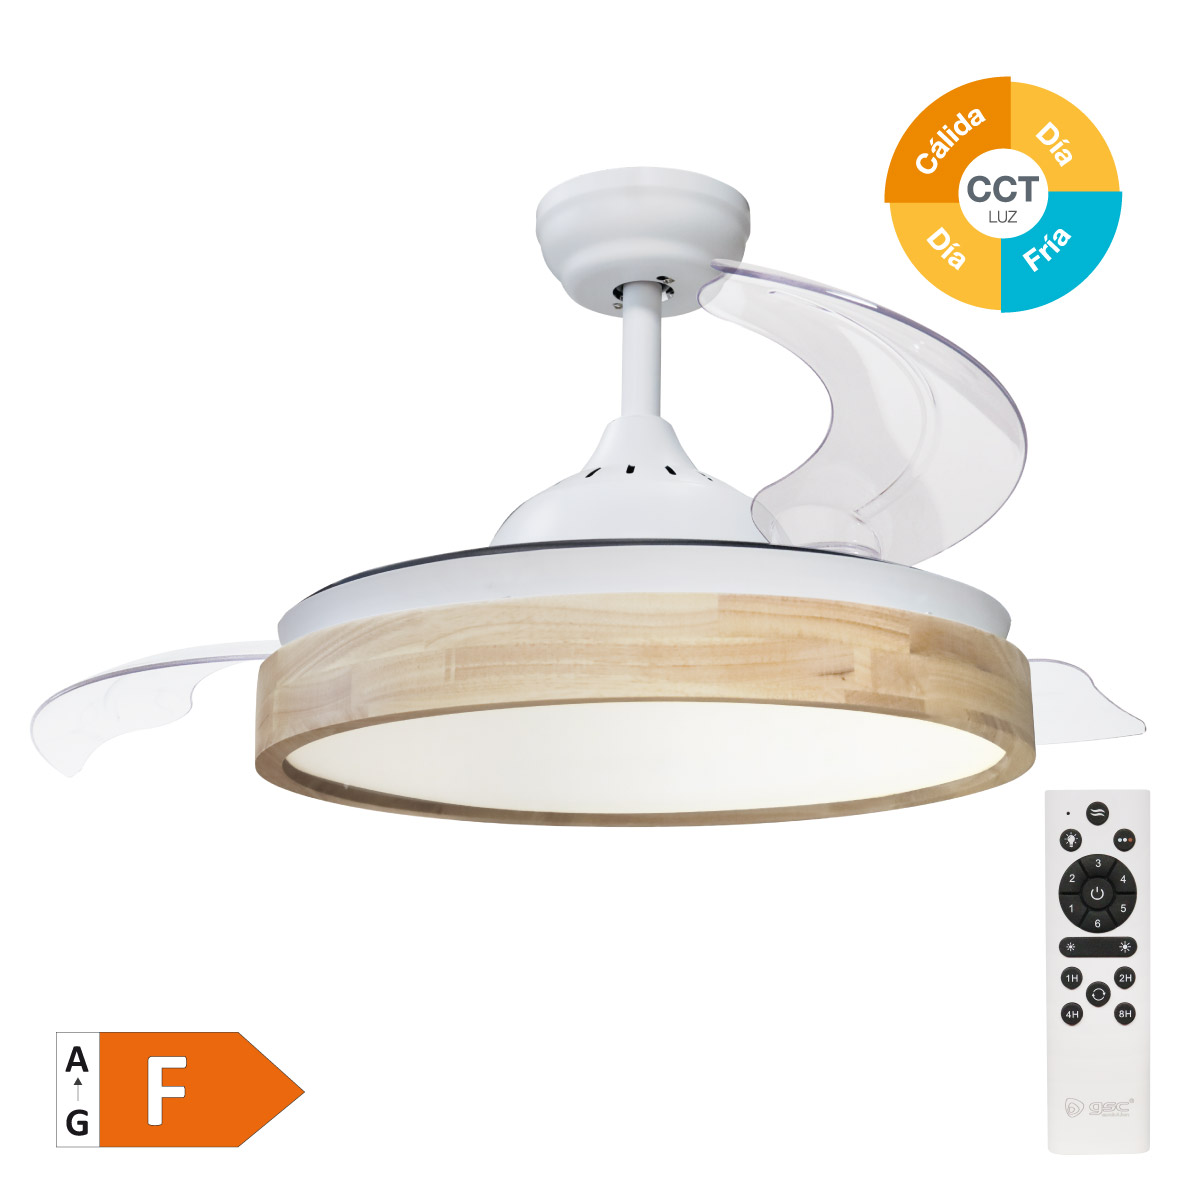 Ranta 42' DC ceiling fan with remote control CCT 3 retractable blades transparent Wood/White